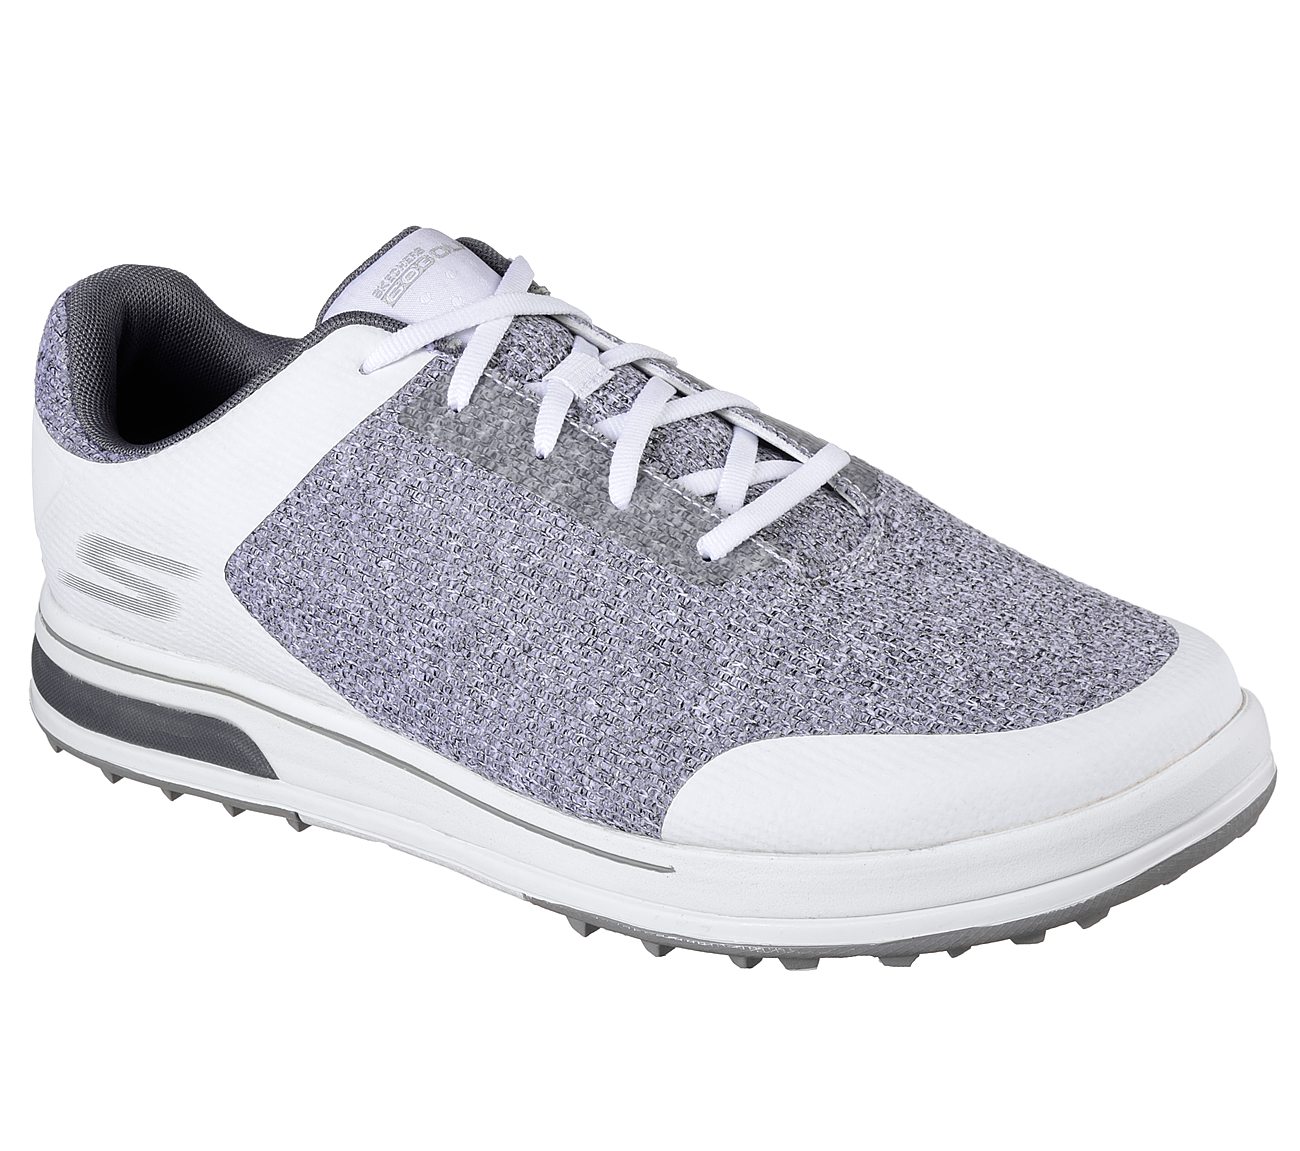 sketchers extra wide golf shoes